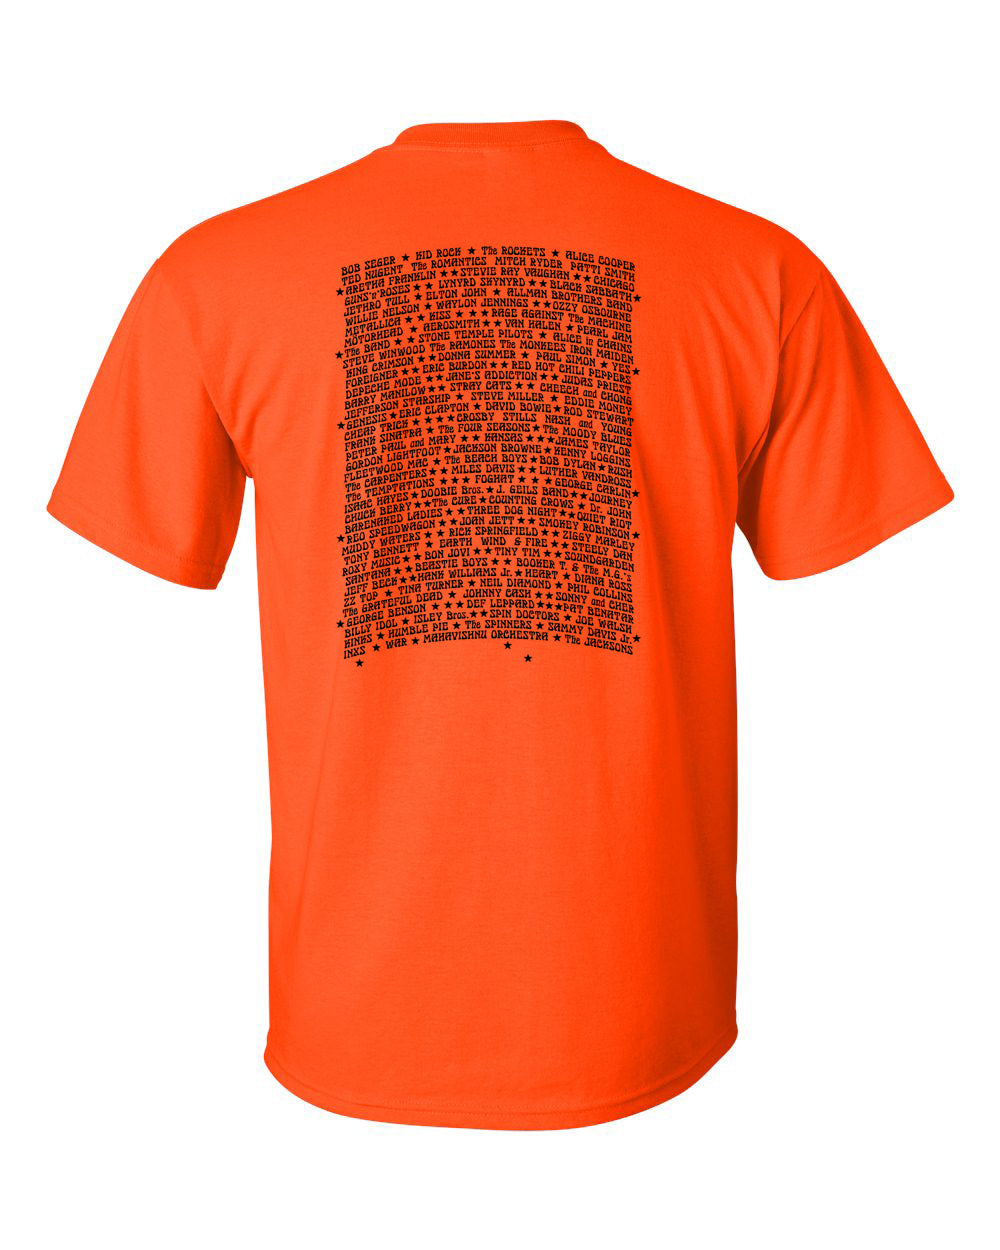 PINE KNOB DOUBLE SIDED T-SHIRT